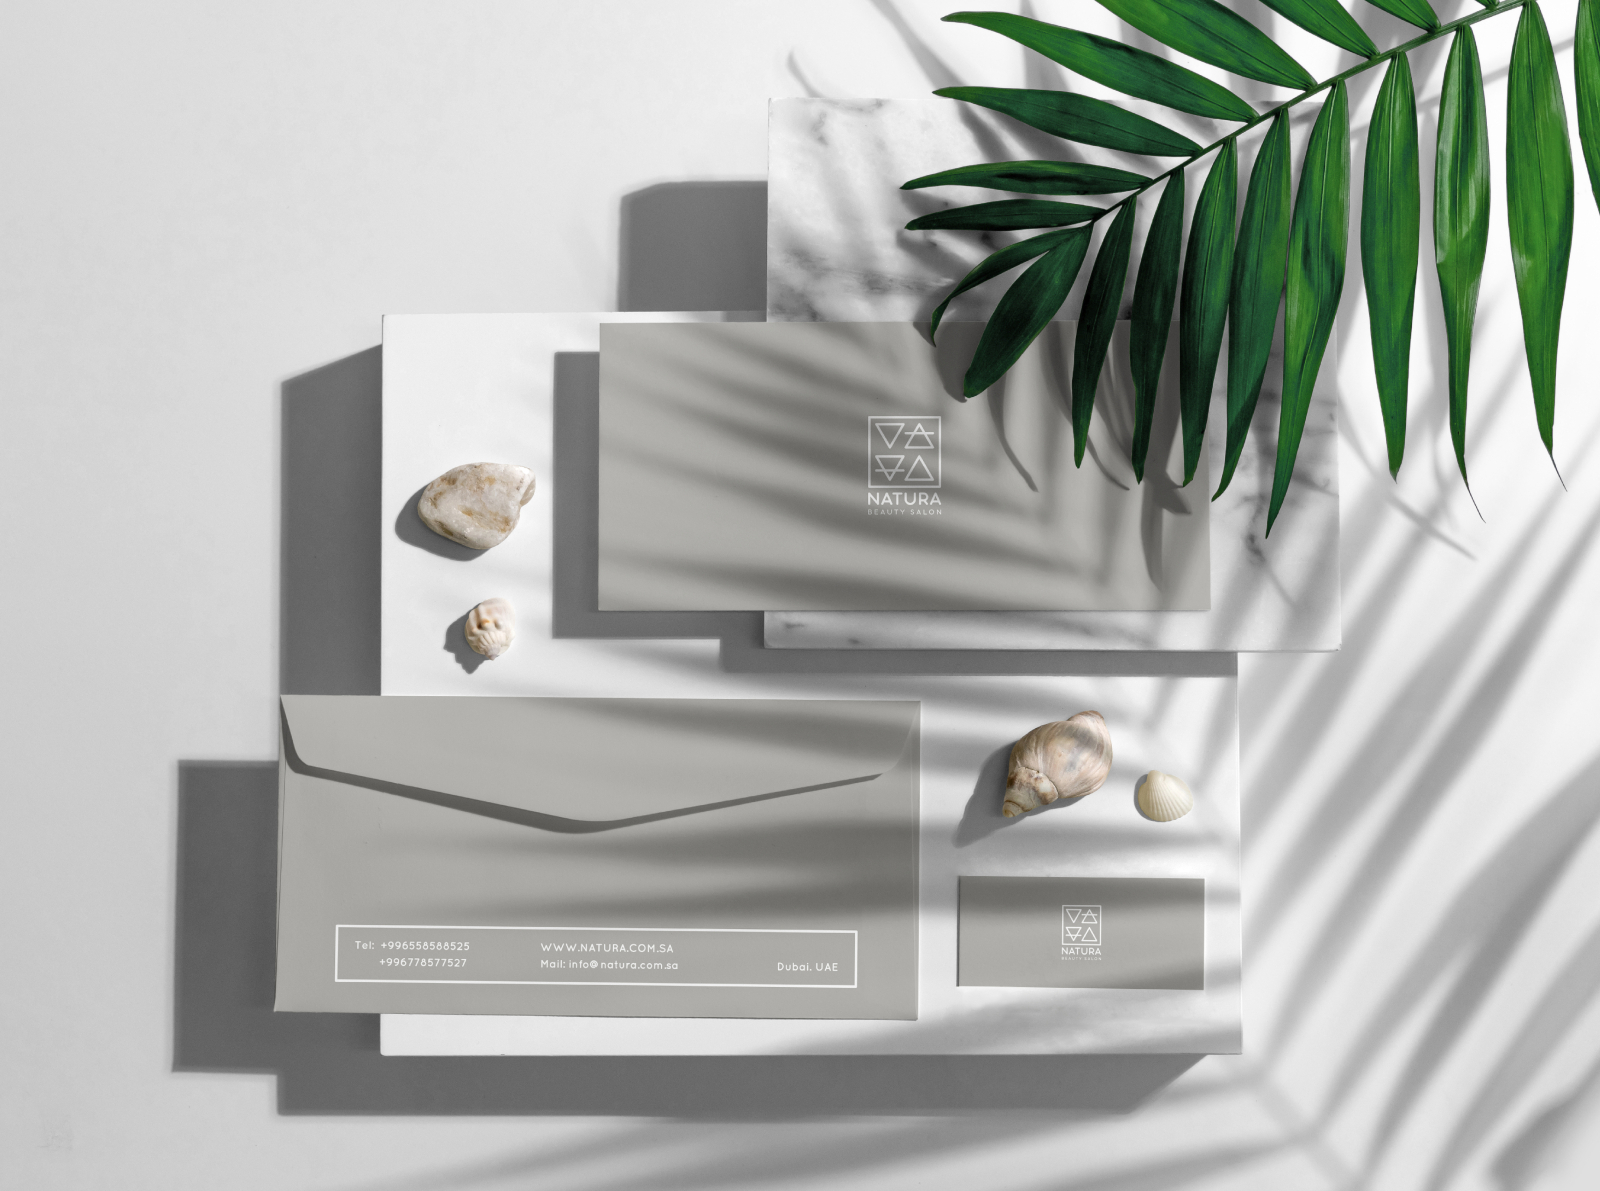 Natura Beauty salon by Nour Obaid on Dribbble